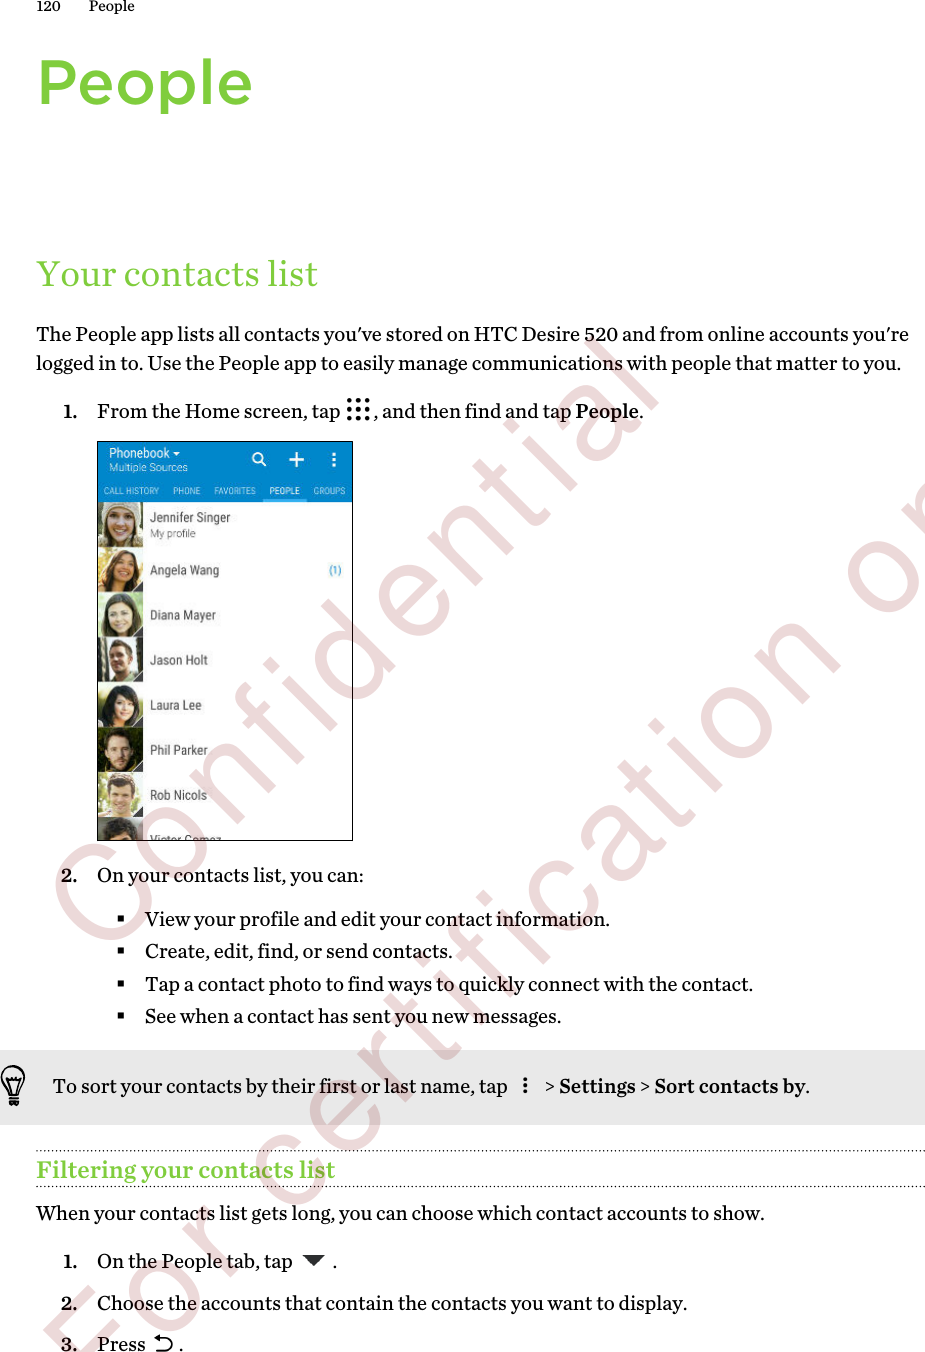 PeopleYour contacts listThe People app lists all contacts you&apos;ve stored on HTC Desire 520 and from online accounts you&apos;relogged in to. Use the People app to easily manage communications with people that matter to you.1. From the Home screen, tap  , and then find and tap People. 2. On your contacts list, you can:§View your profile and edit your contact information.§Create, edit, find, or send contacts.§Tap a contact photo to find ways to quickly connect with the contact.§See when a contact has sent you new messages.To sort your contacts by their first or last name, tap   &gt; Settings &gt; Sort contacts by.Filtering your contacts listWhen your contacts list gets long, you can choose which contact accounts to show.1. On the People tab, tap  .2. Choose the accounts that contain the contacts you want to display.3. Press  .120 People        Confidential  For certification only